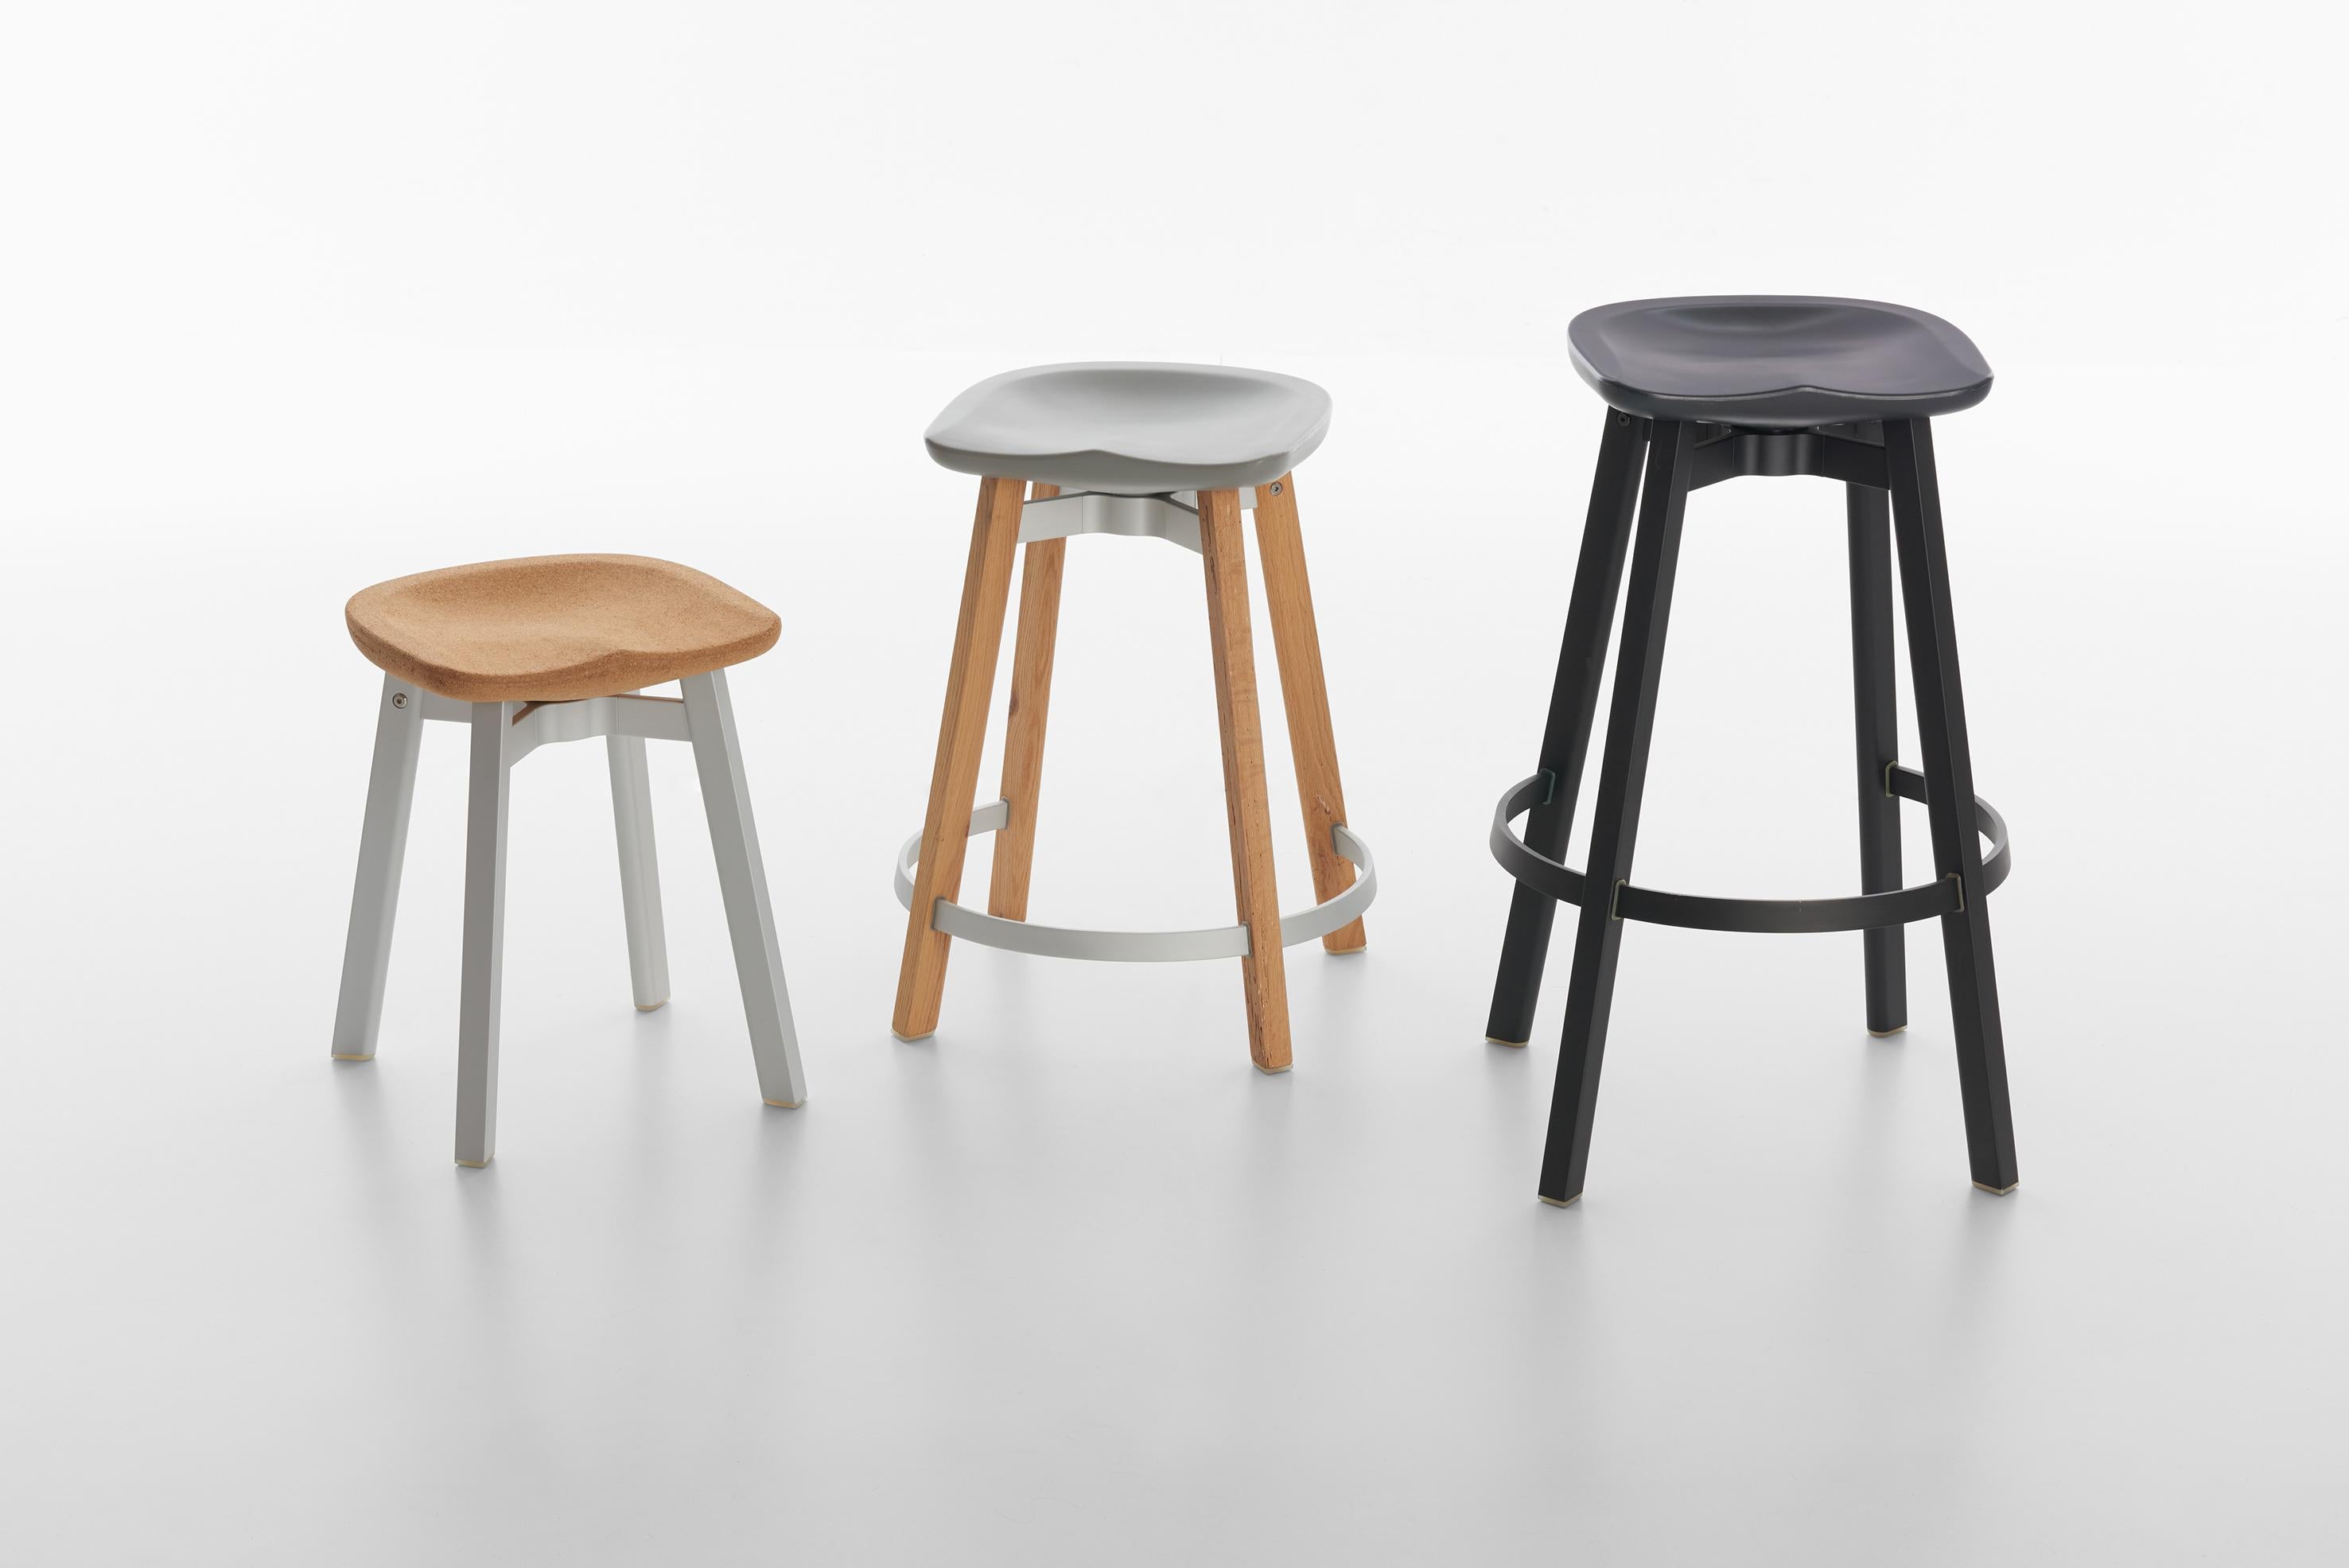 Modern Emeco Su Counter Stool in Natural Aluminum w/ Flint Seat by Nendo